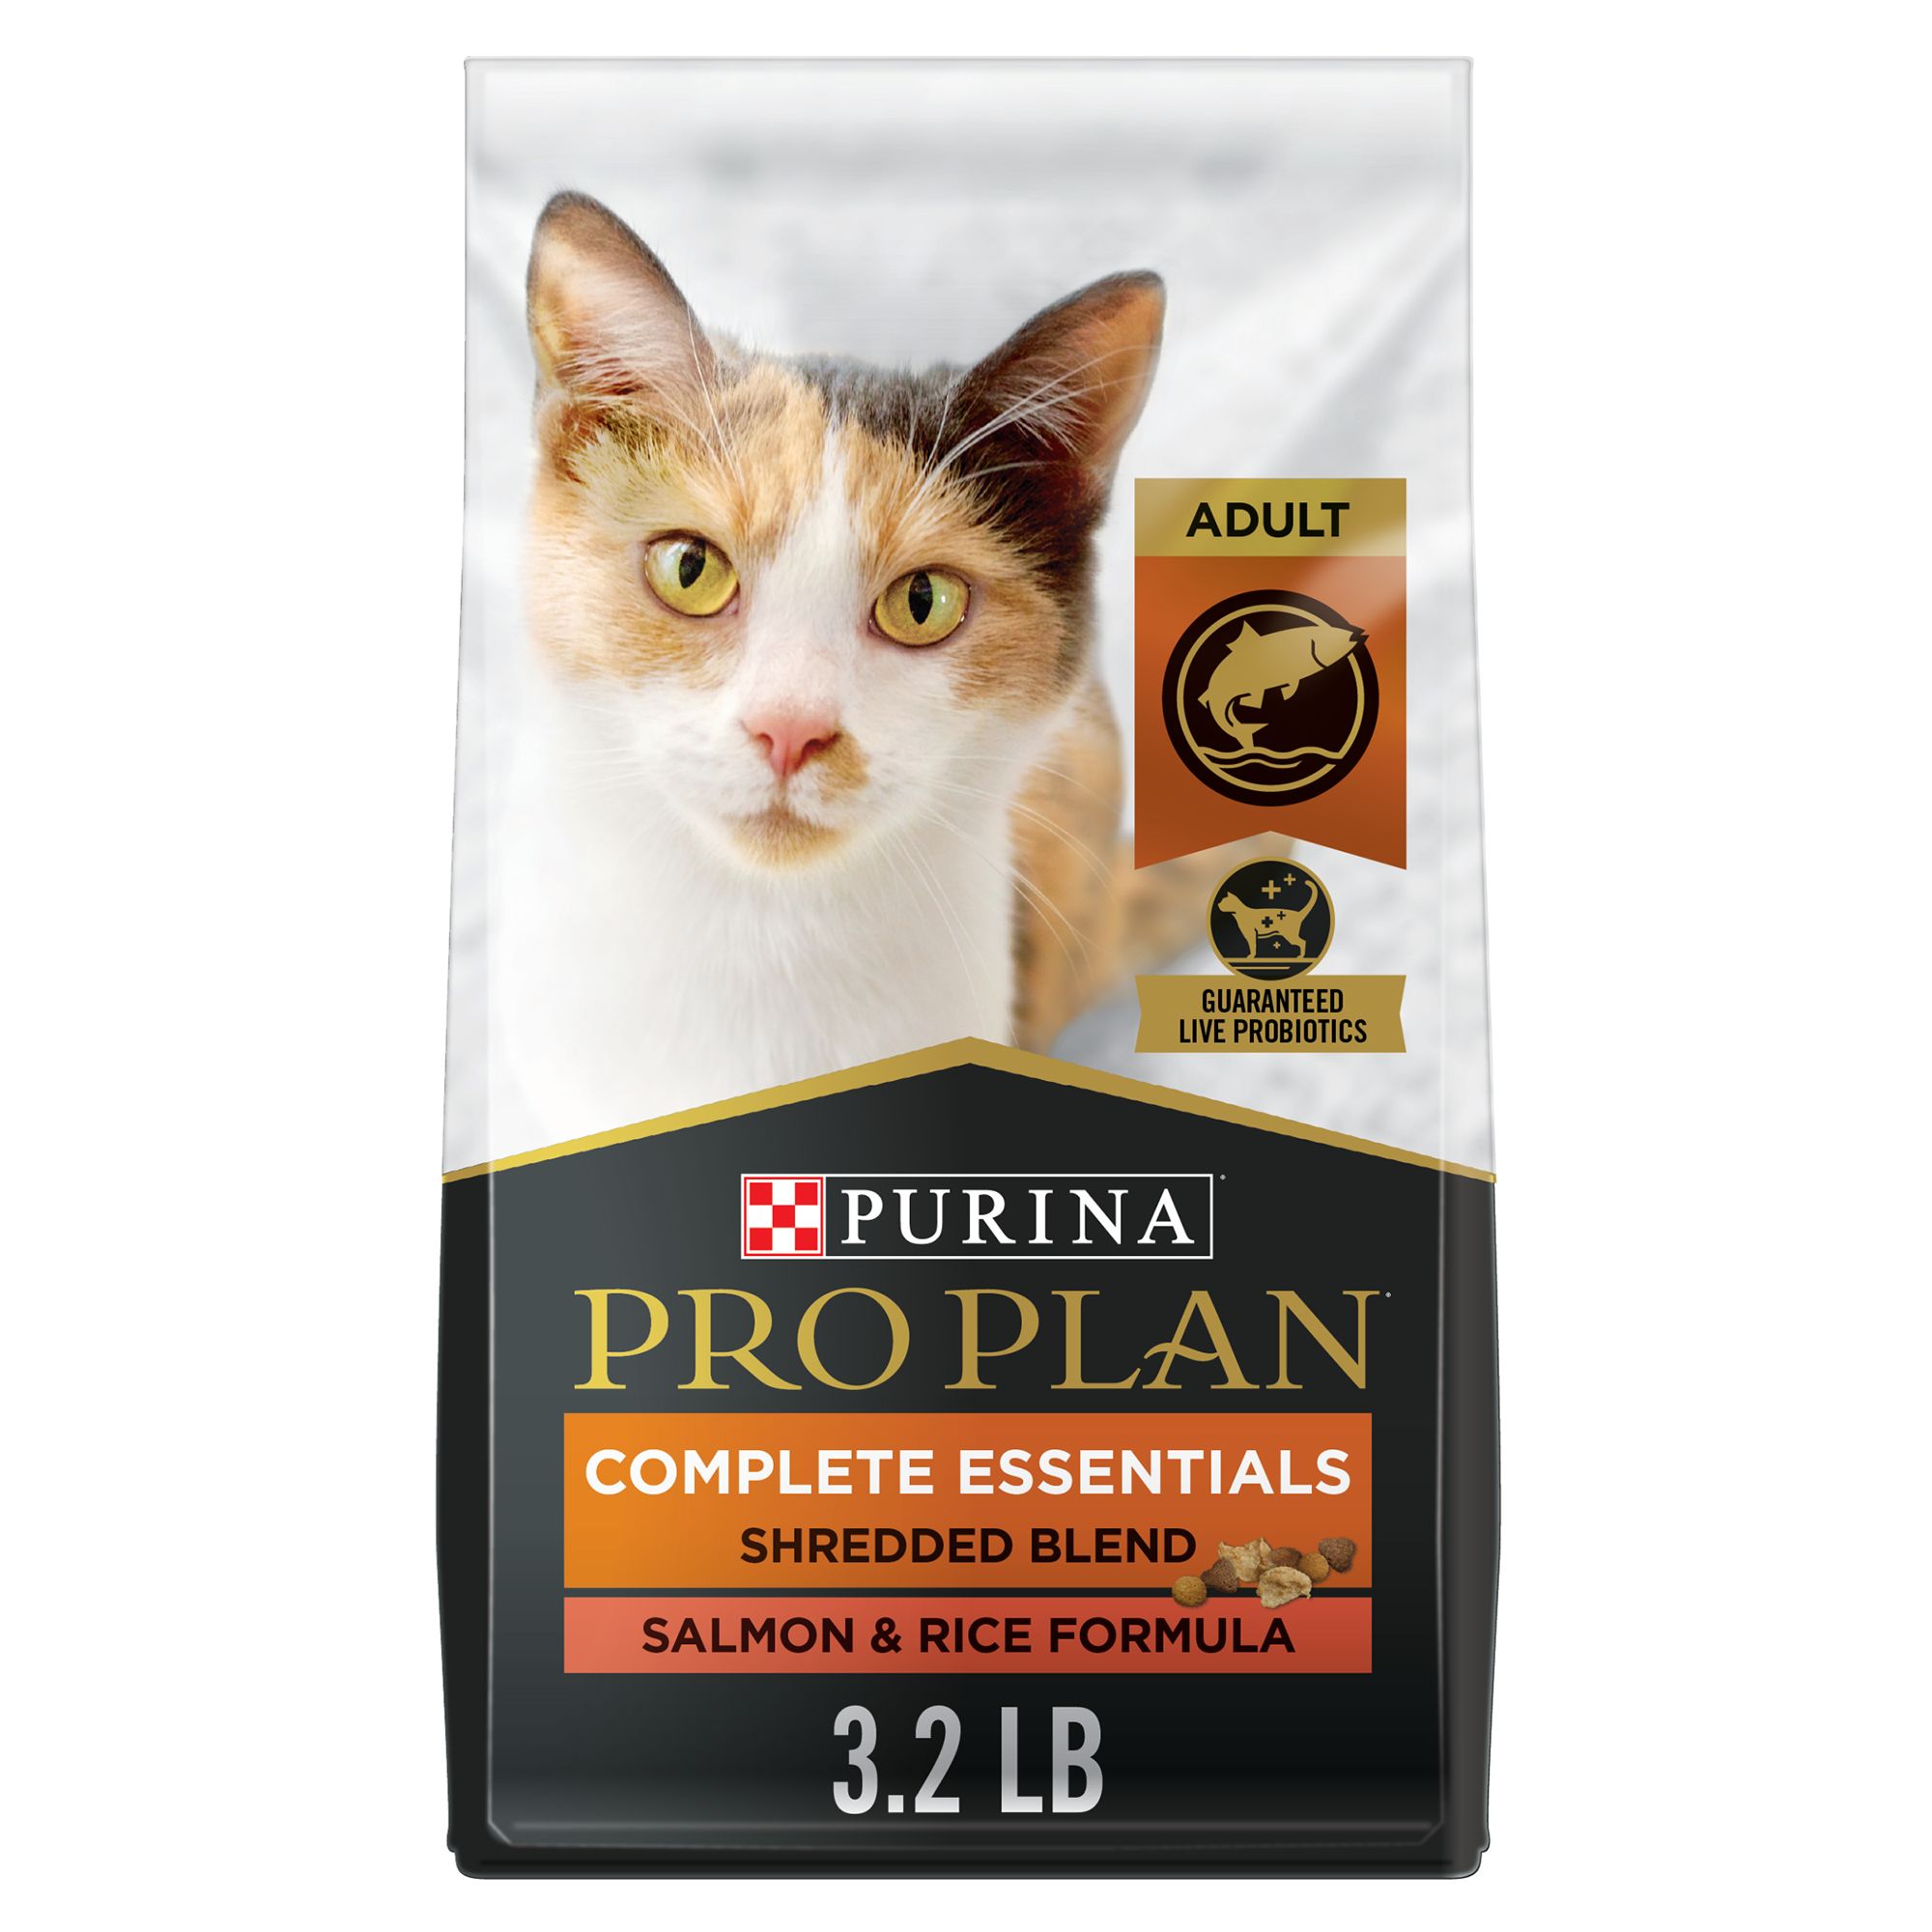 purina-pro-plan-complete-essentials-adult-dry-cat-food-with-vitamins